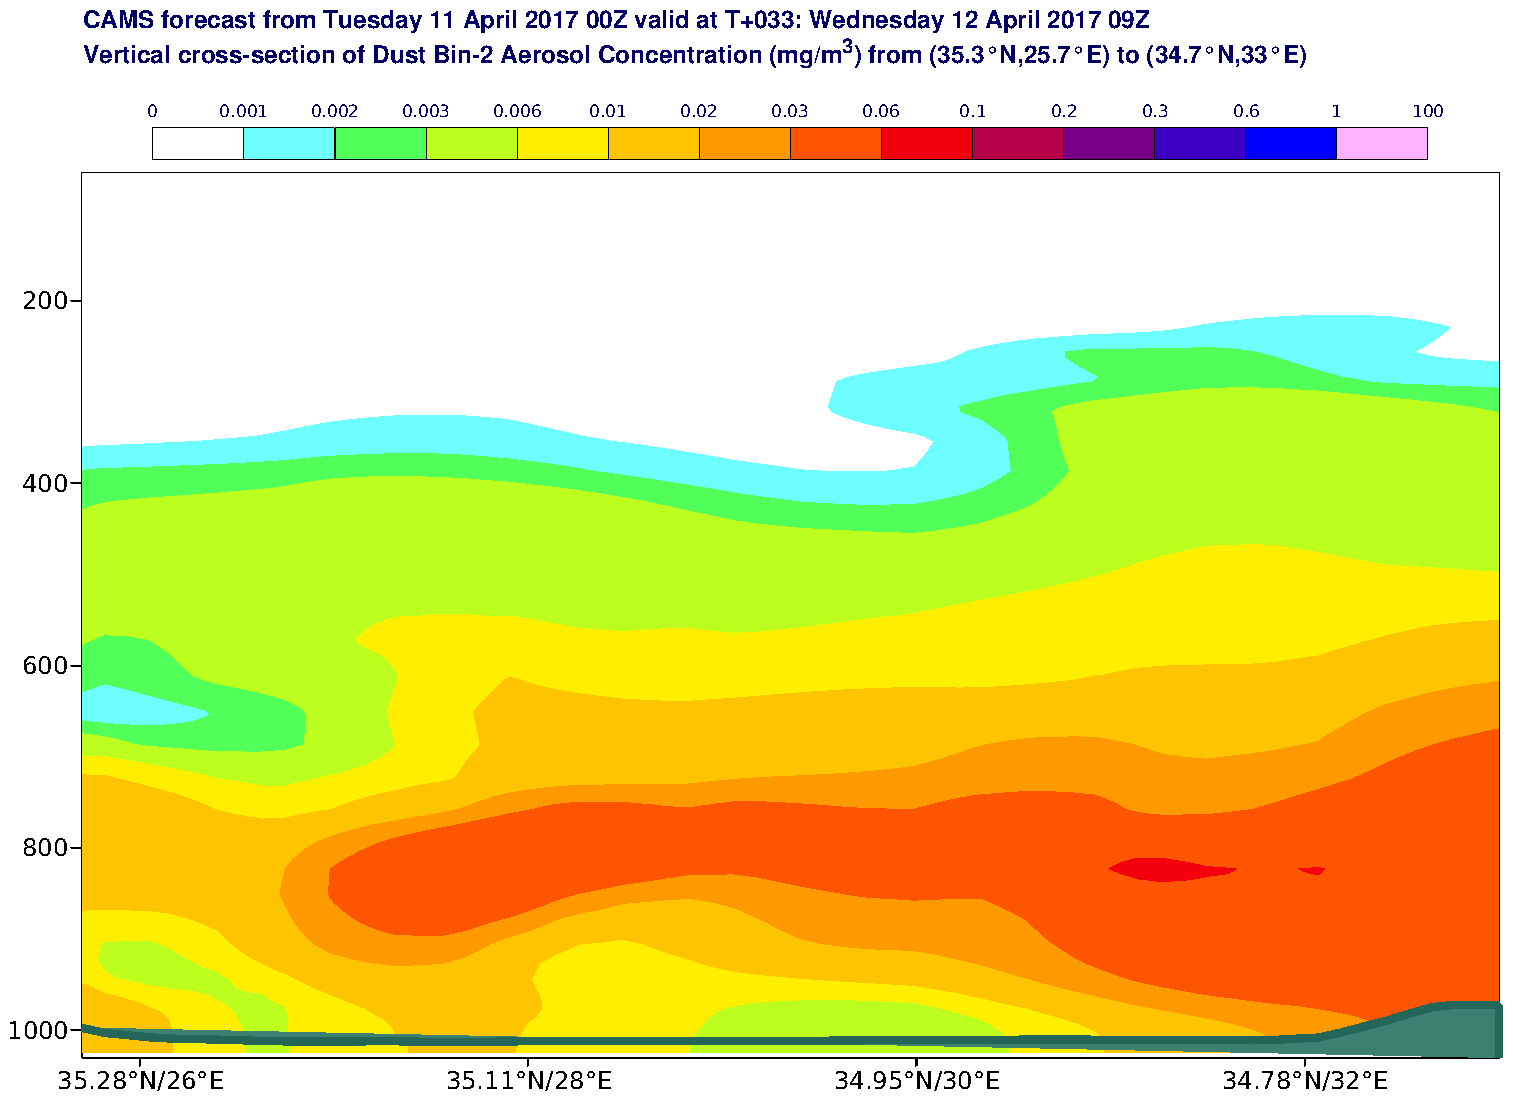 Vertical cross-section of Dust Bin-2 Aerosol Concentration (mg/m3) valid at T33 - 2017-04-12 09:00